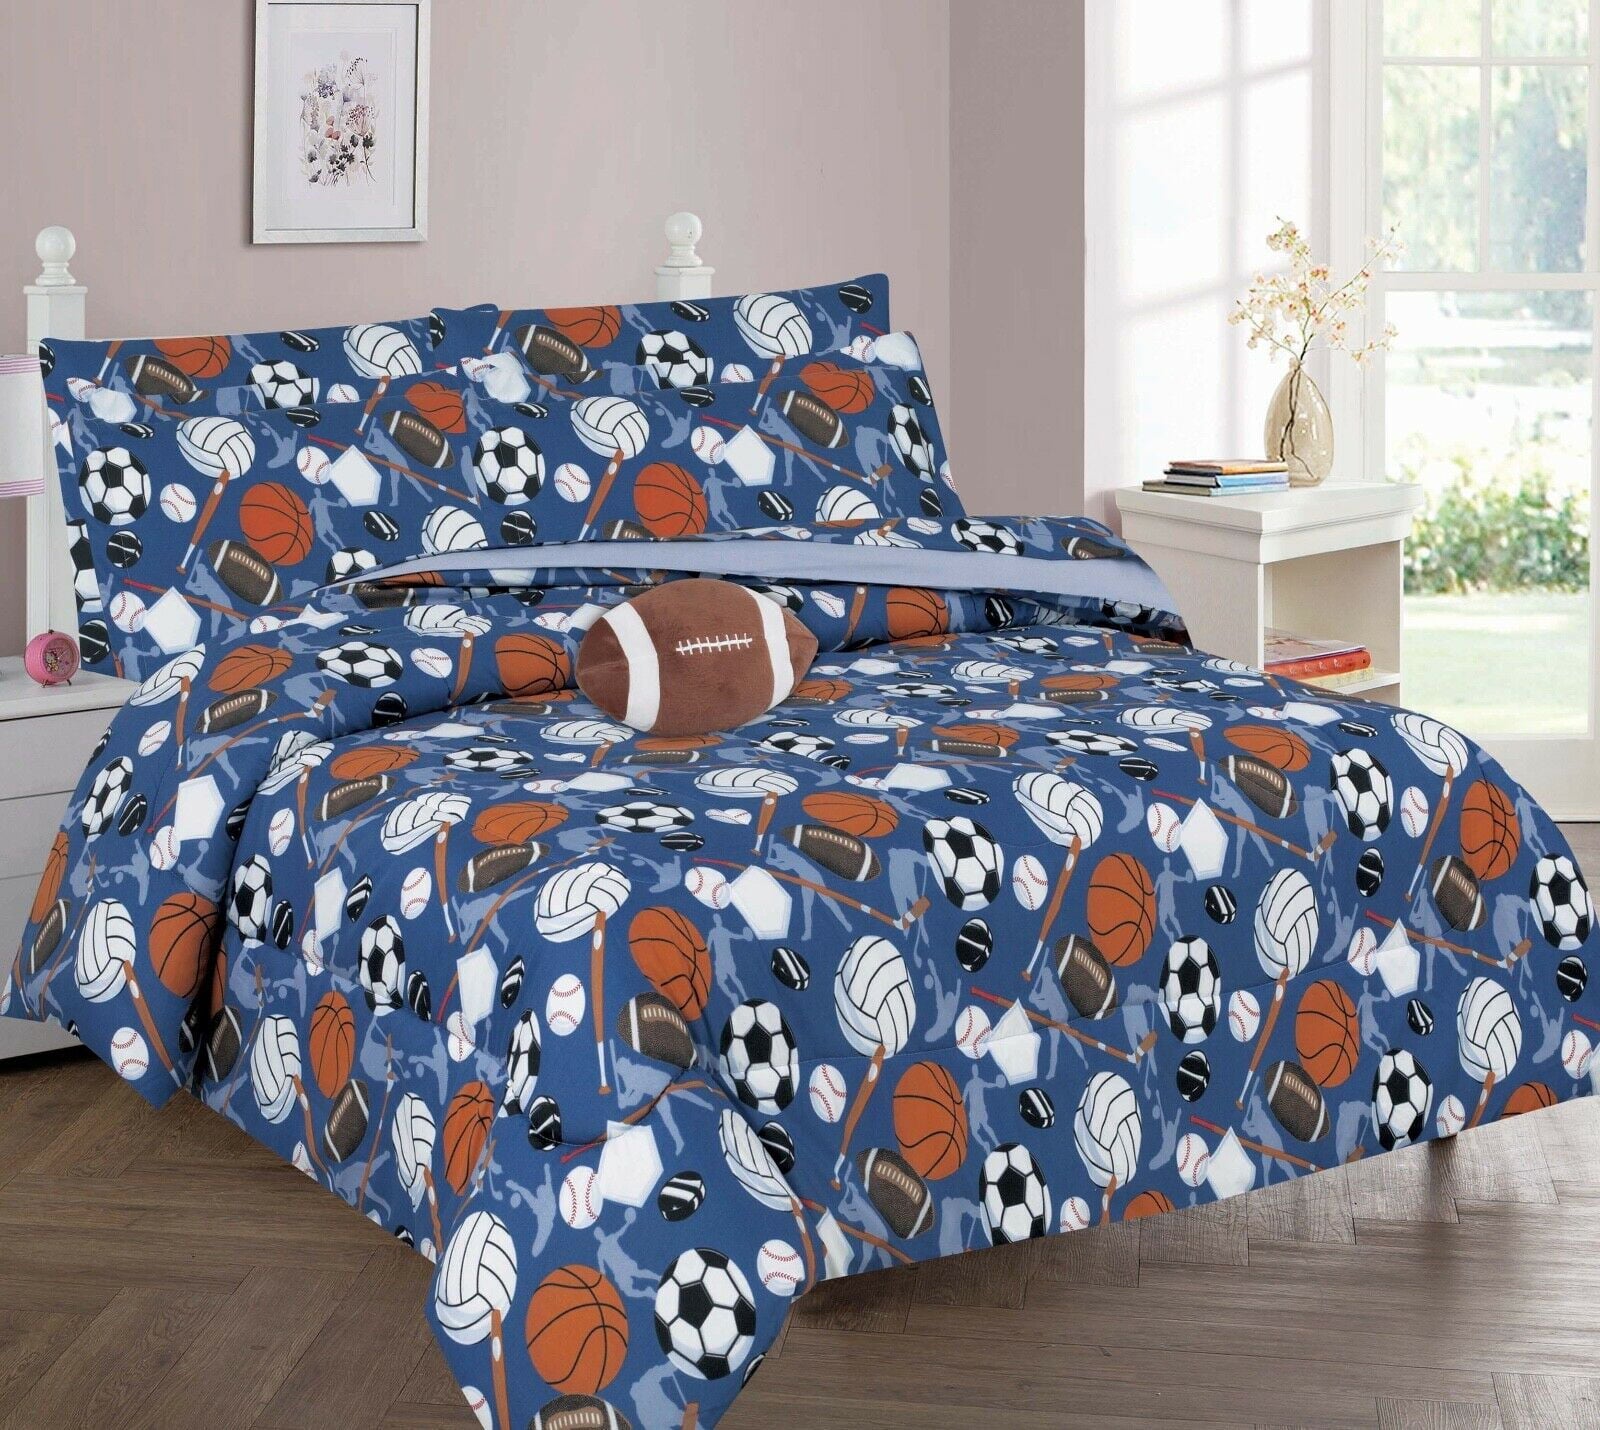 Bedding comforter in full size hockey sport design matching sheet set for kids bedroom décor for girls boys 8 pieces